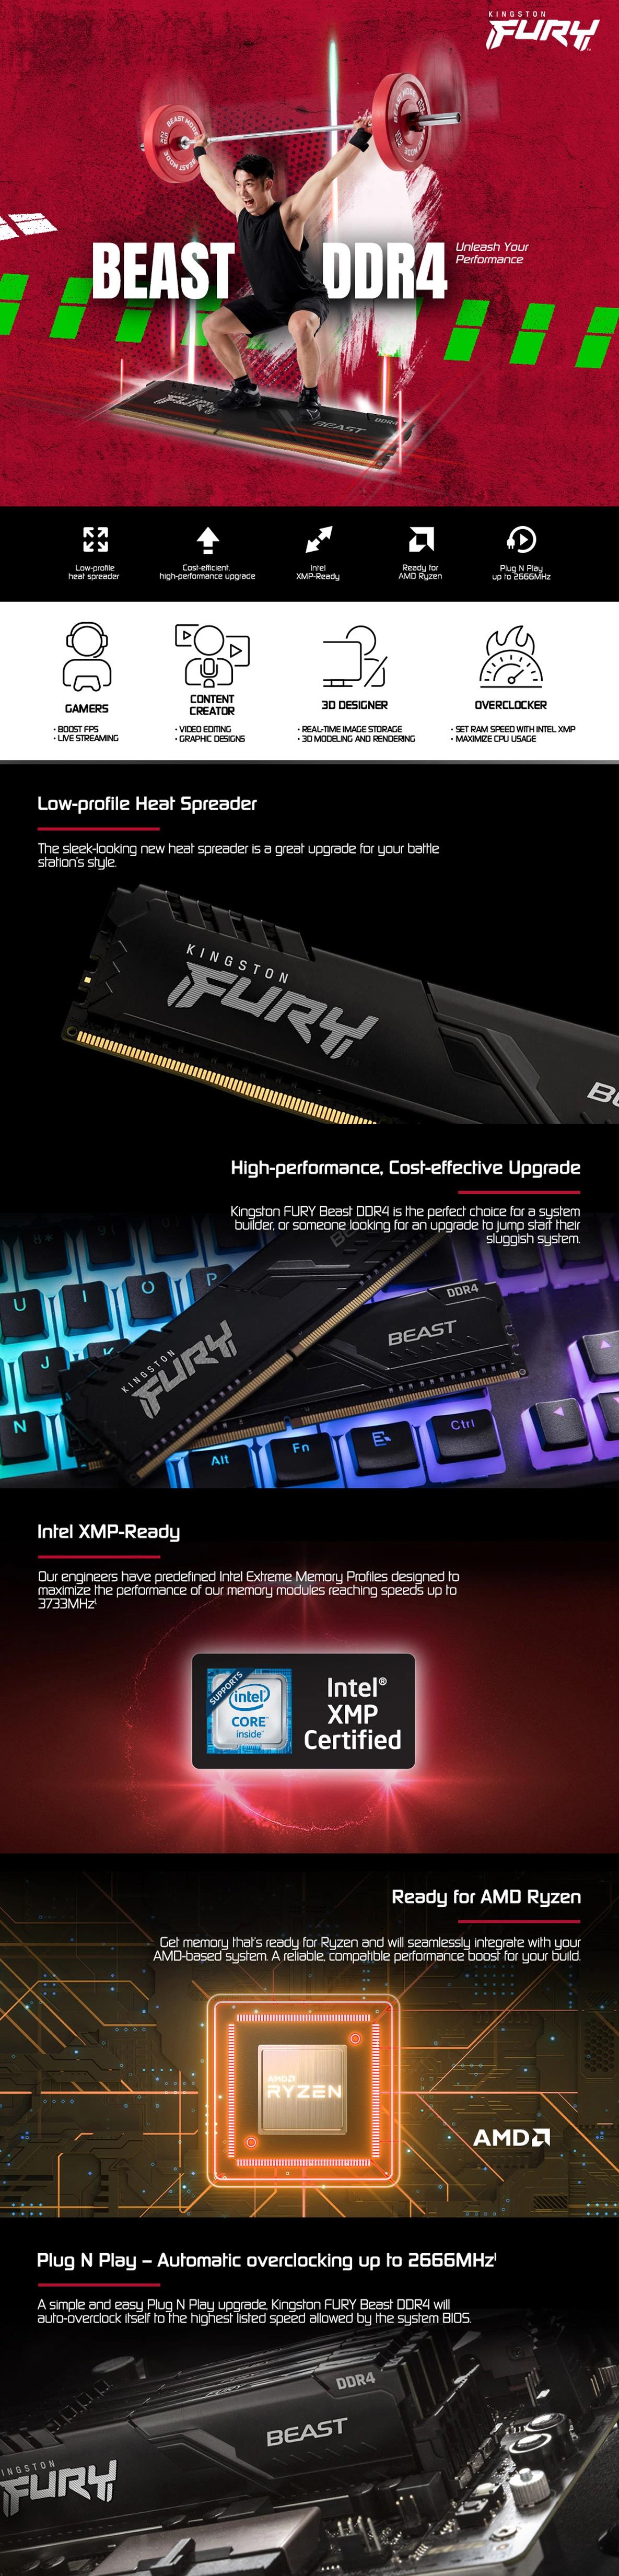 A large marketing image providing additional information about the product Kingston 64GB Kit (2x32GB) DDR4 Fury Beast C18 3600MHz - Black - Additional alt info not provided